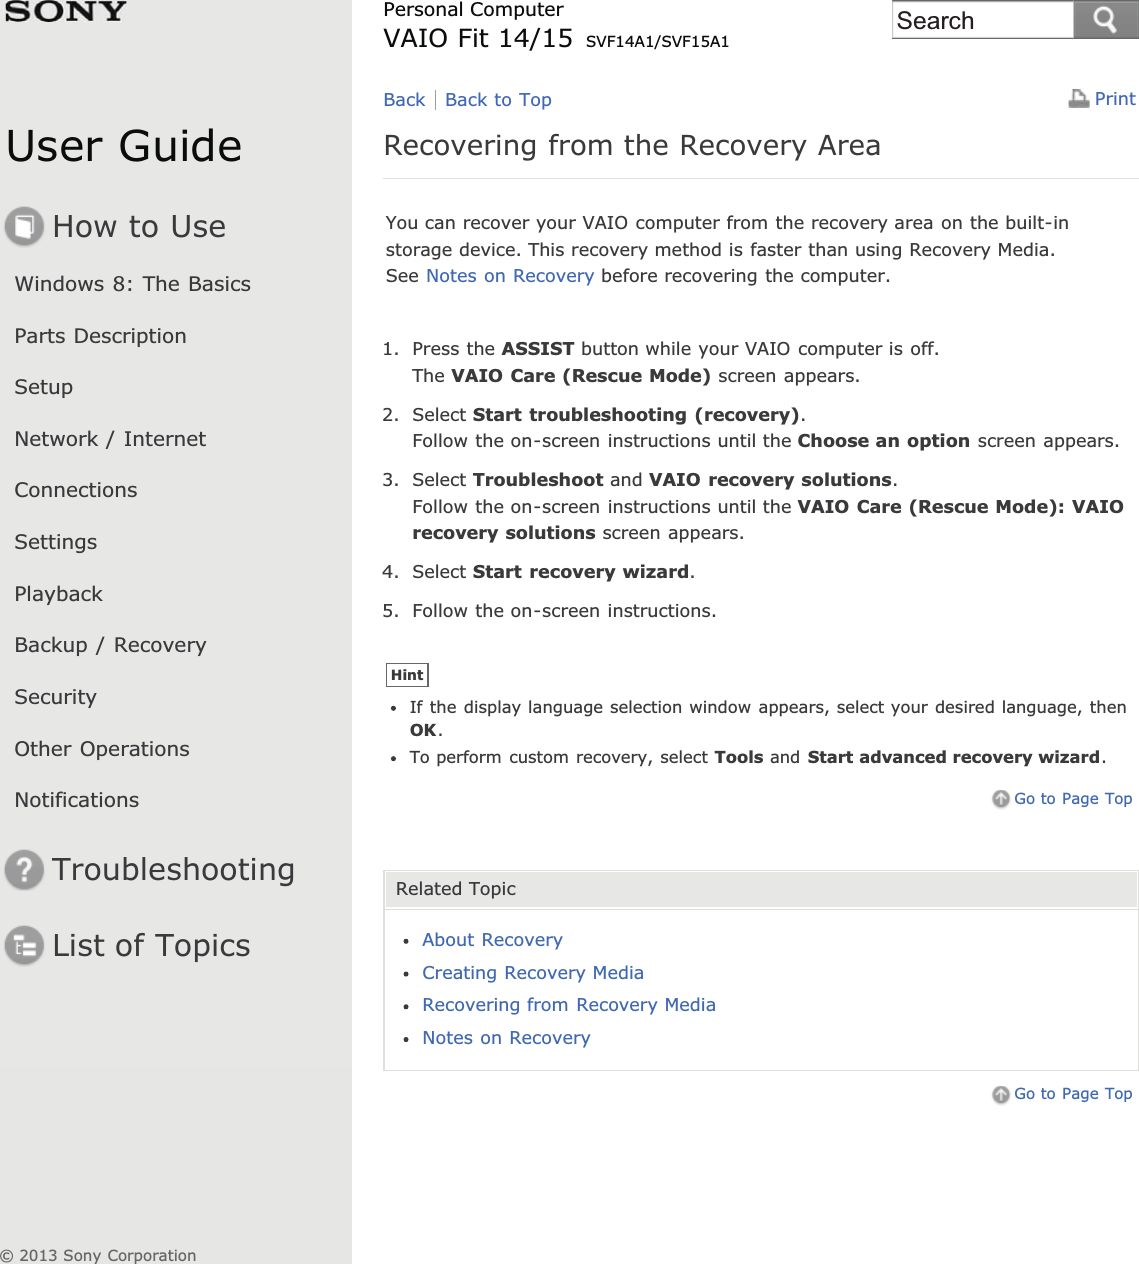 User GuideHow to UseWindows 8: The BasicsParts DescriptionSetupNetwork / InternetConnectionsSettingsPlaybackBackup / RecoverySecurityOther OperationsNotificationsTroubleshootingList of TopicsPrintPersonal ComputerVAIO Fit 14/15 SVF14A1/SVF15A1Recovering from the Recovery AreaYou can recover your VAIO computer from the recovery area on the built-instorage device. This recovery method is faster than using Recovery Media.See Notes on Recovery before recovering the computer.1. Press the ASSIST button while your VAIO computer is off.The VAIO Care (Rescue Mode) screen appears.2. Select Start troubleshooting (recovery).Follow the on-screen instructions until the Choose an option screen appears.3. Select Troubleshoot and VAIO recovery solutions.Follow the on-screen instructions until the VAIO Care (Rescue Mode): VAIOrecovery solutions screen appears.4. Select Start recovery wizard.5. Follow the on-screen instructions.HintIf the display language selection window appears, select your desired language, thenOK.To perform custom recovery, select Tools and Start advanced recovery wizard.Go to Page TopRelated TopicAbout RecoveryCreating Recovery MediaRecovering from Recovery MediaNotes on RecoveryGo to Page TopBack Back to Top© 2013 Sony CorporationSearch